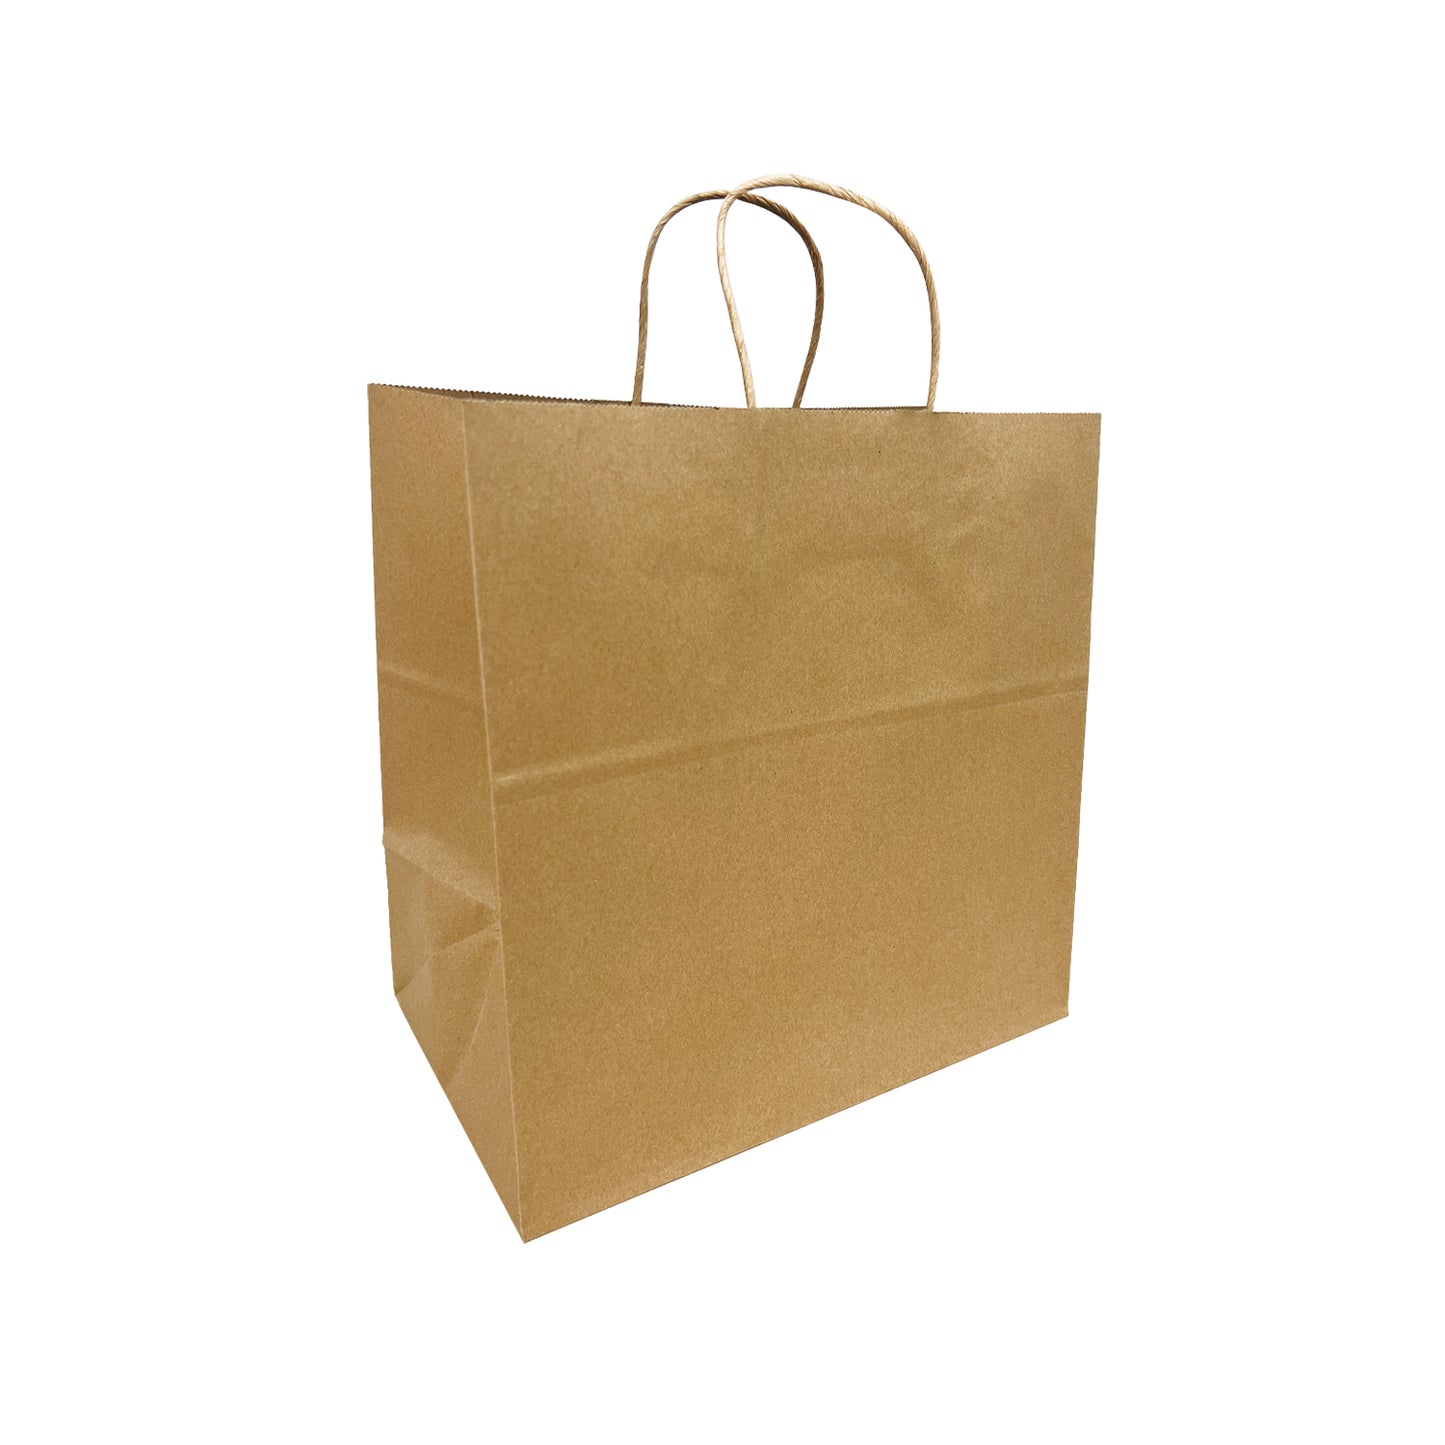 200pcs Restaurant 13x8x13 inches Kraft Paper Bag Cardboard Insert with Twisted Handles, $0.55/pc